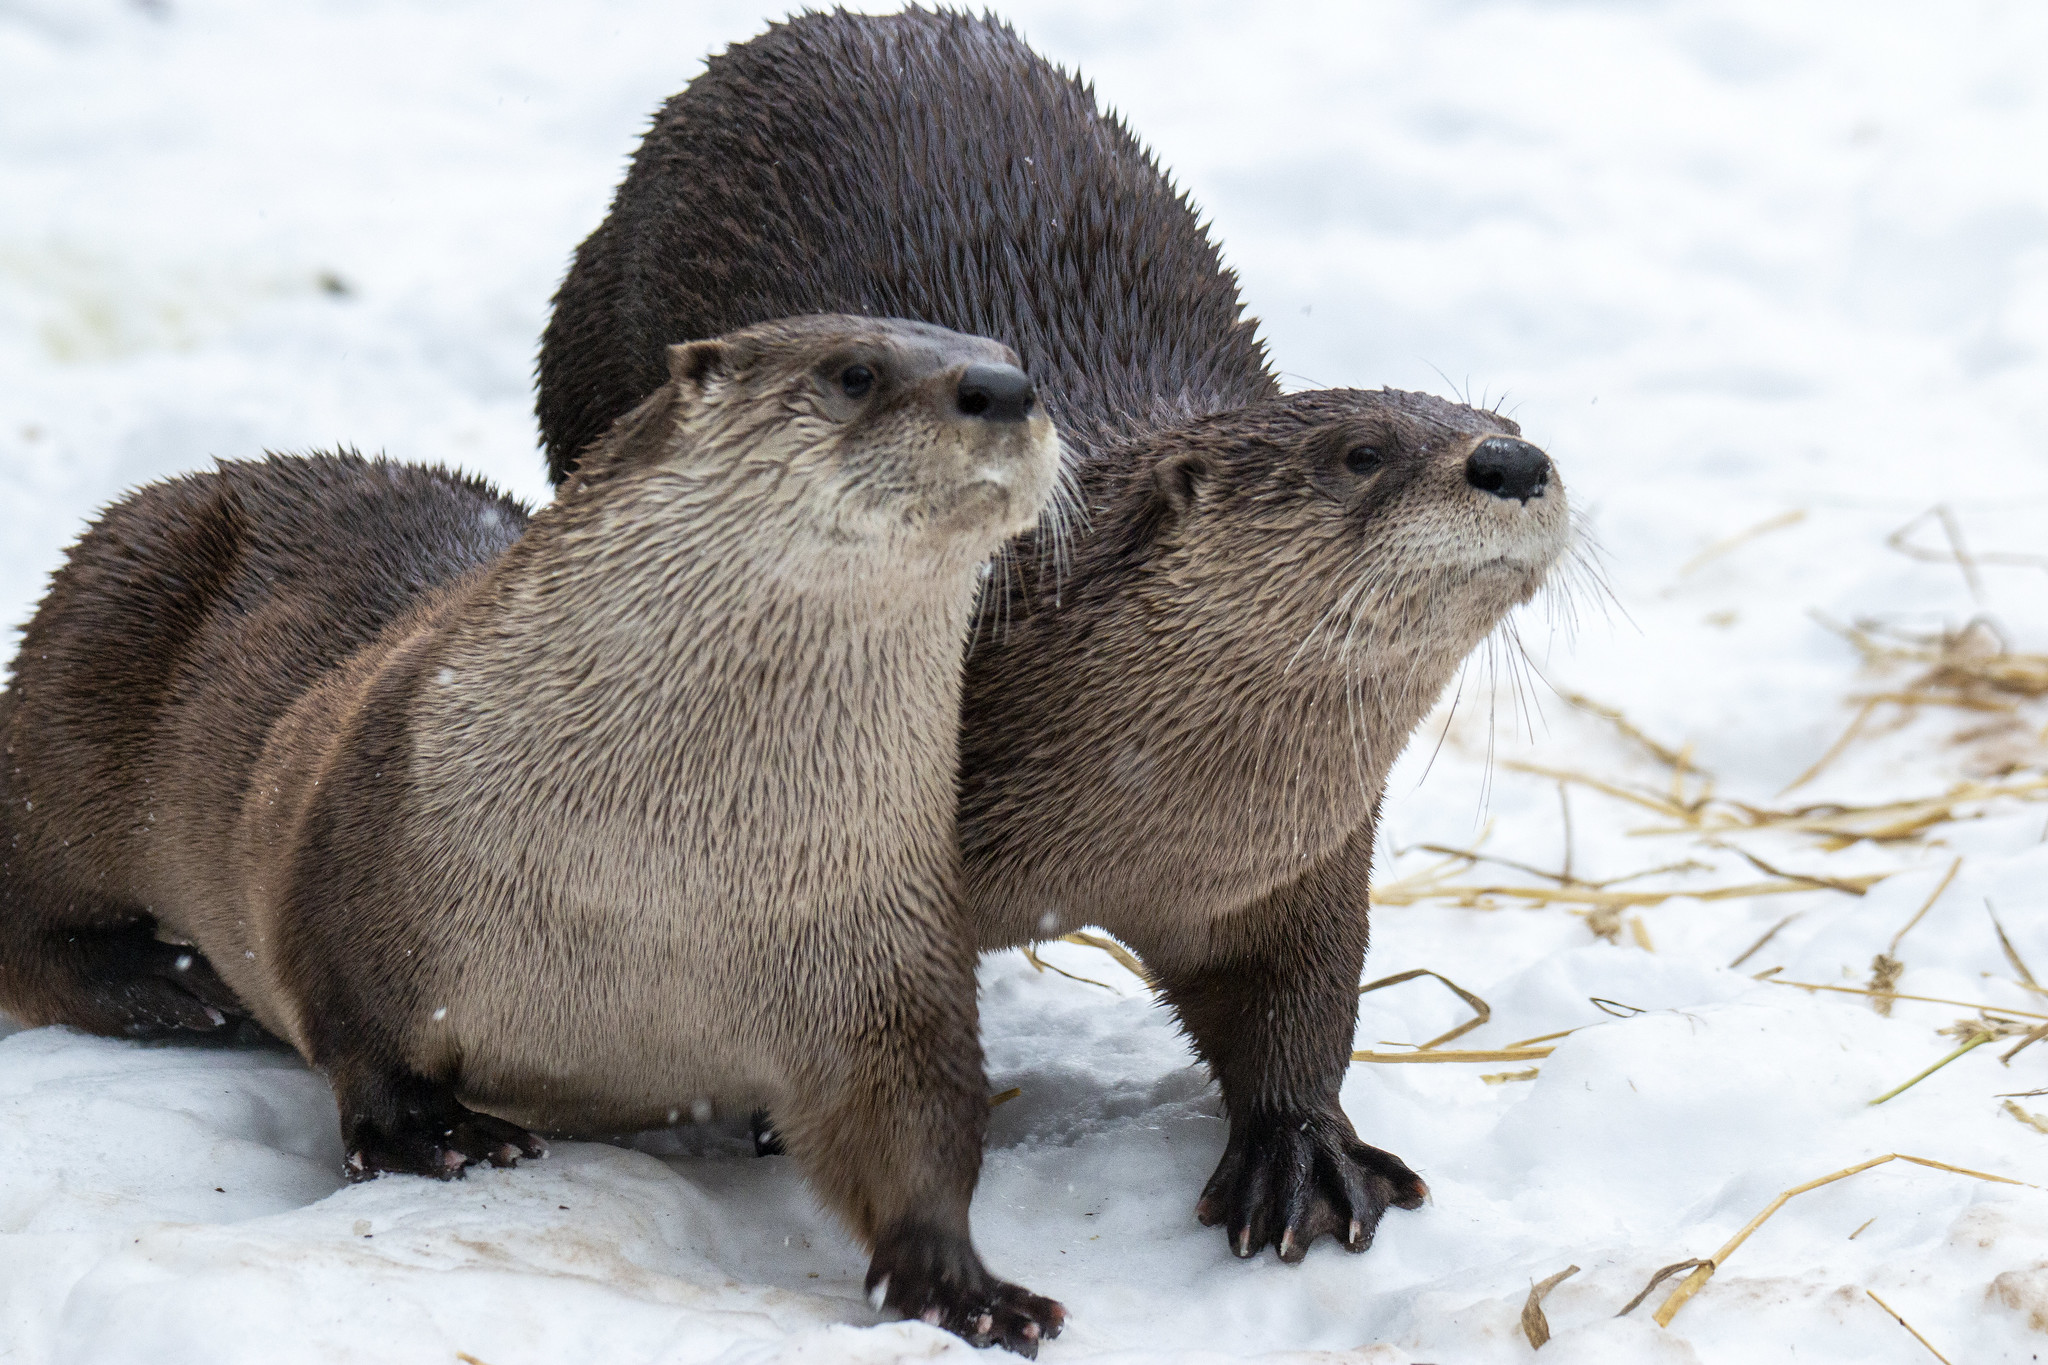 Two river otters walk across a snowy field. (photo © Flickr user Canopic via the Creative Commons)